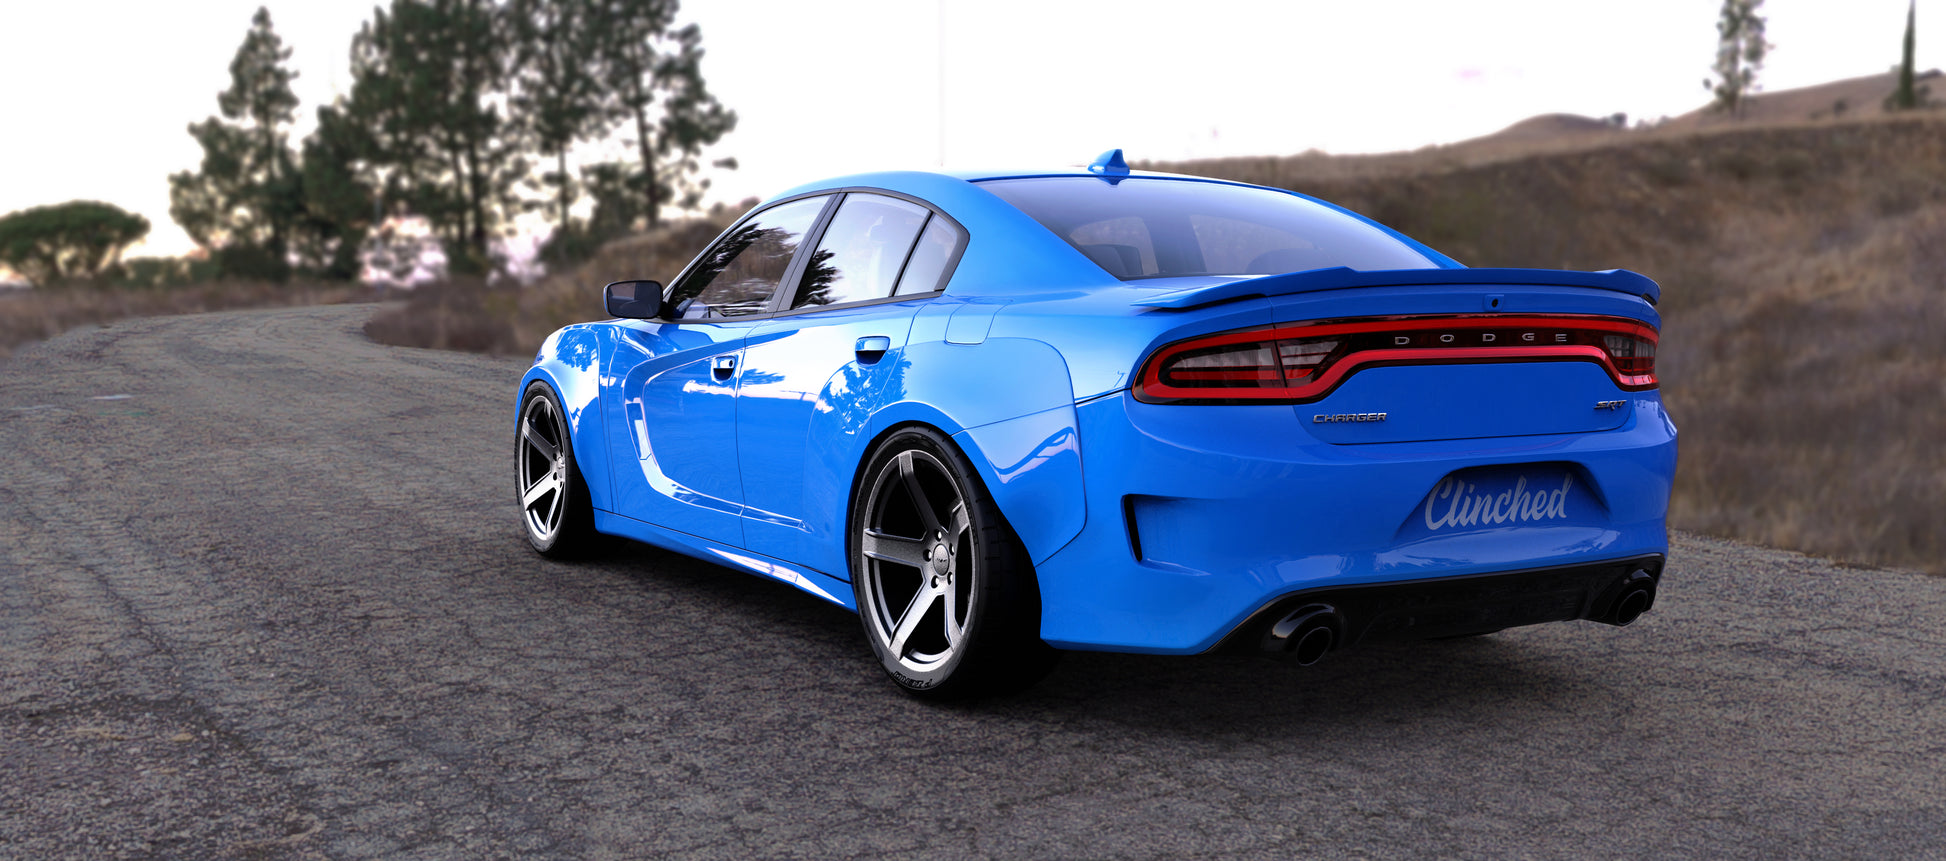 Clinched Dodge Charger Widebody Kit